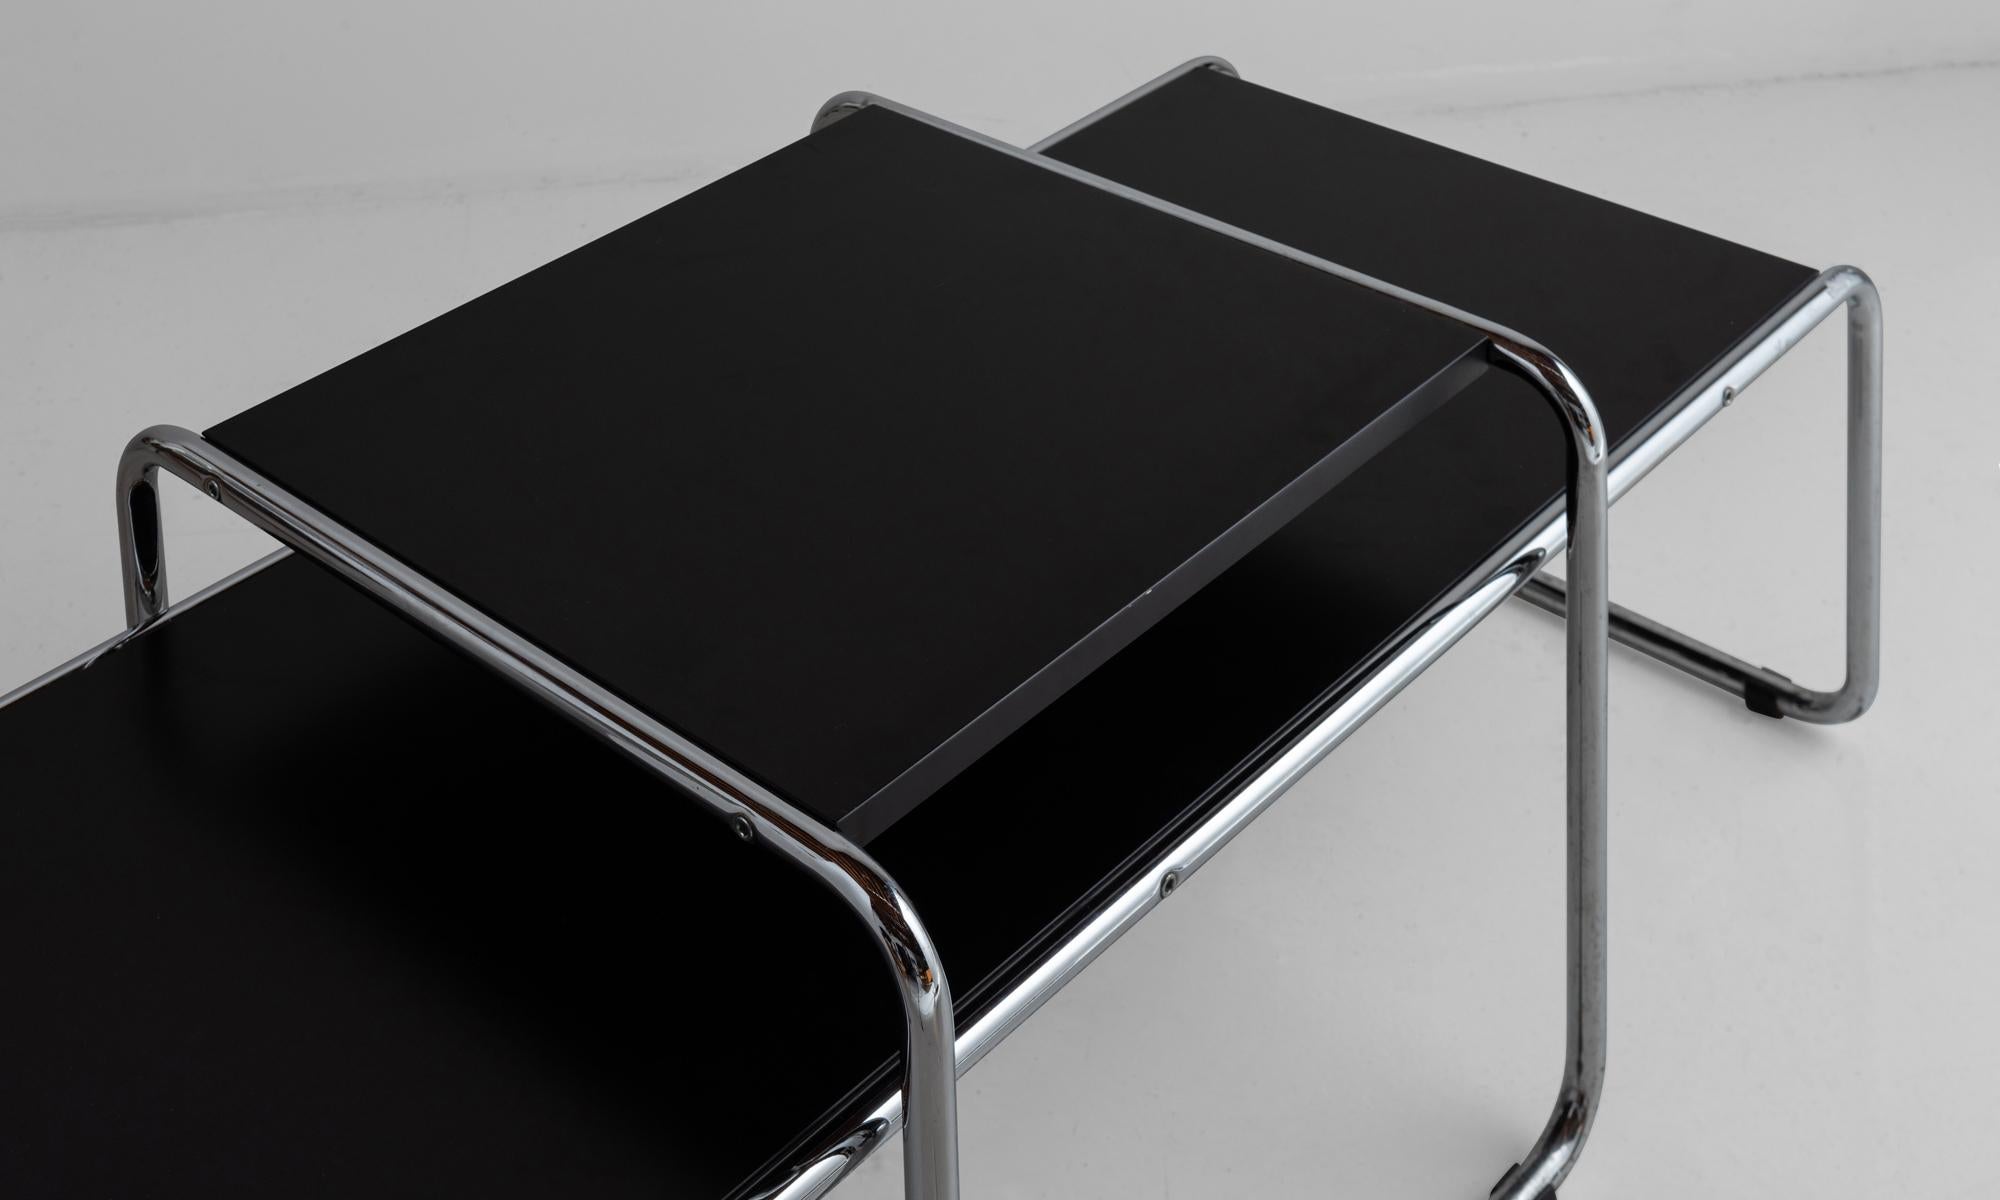 Bauhaus design. Chrome tubular frame with black laminate tops. Includes nesting coffee table and end table. 


Measures: 53